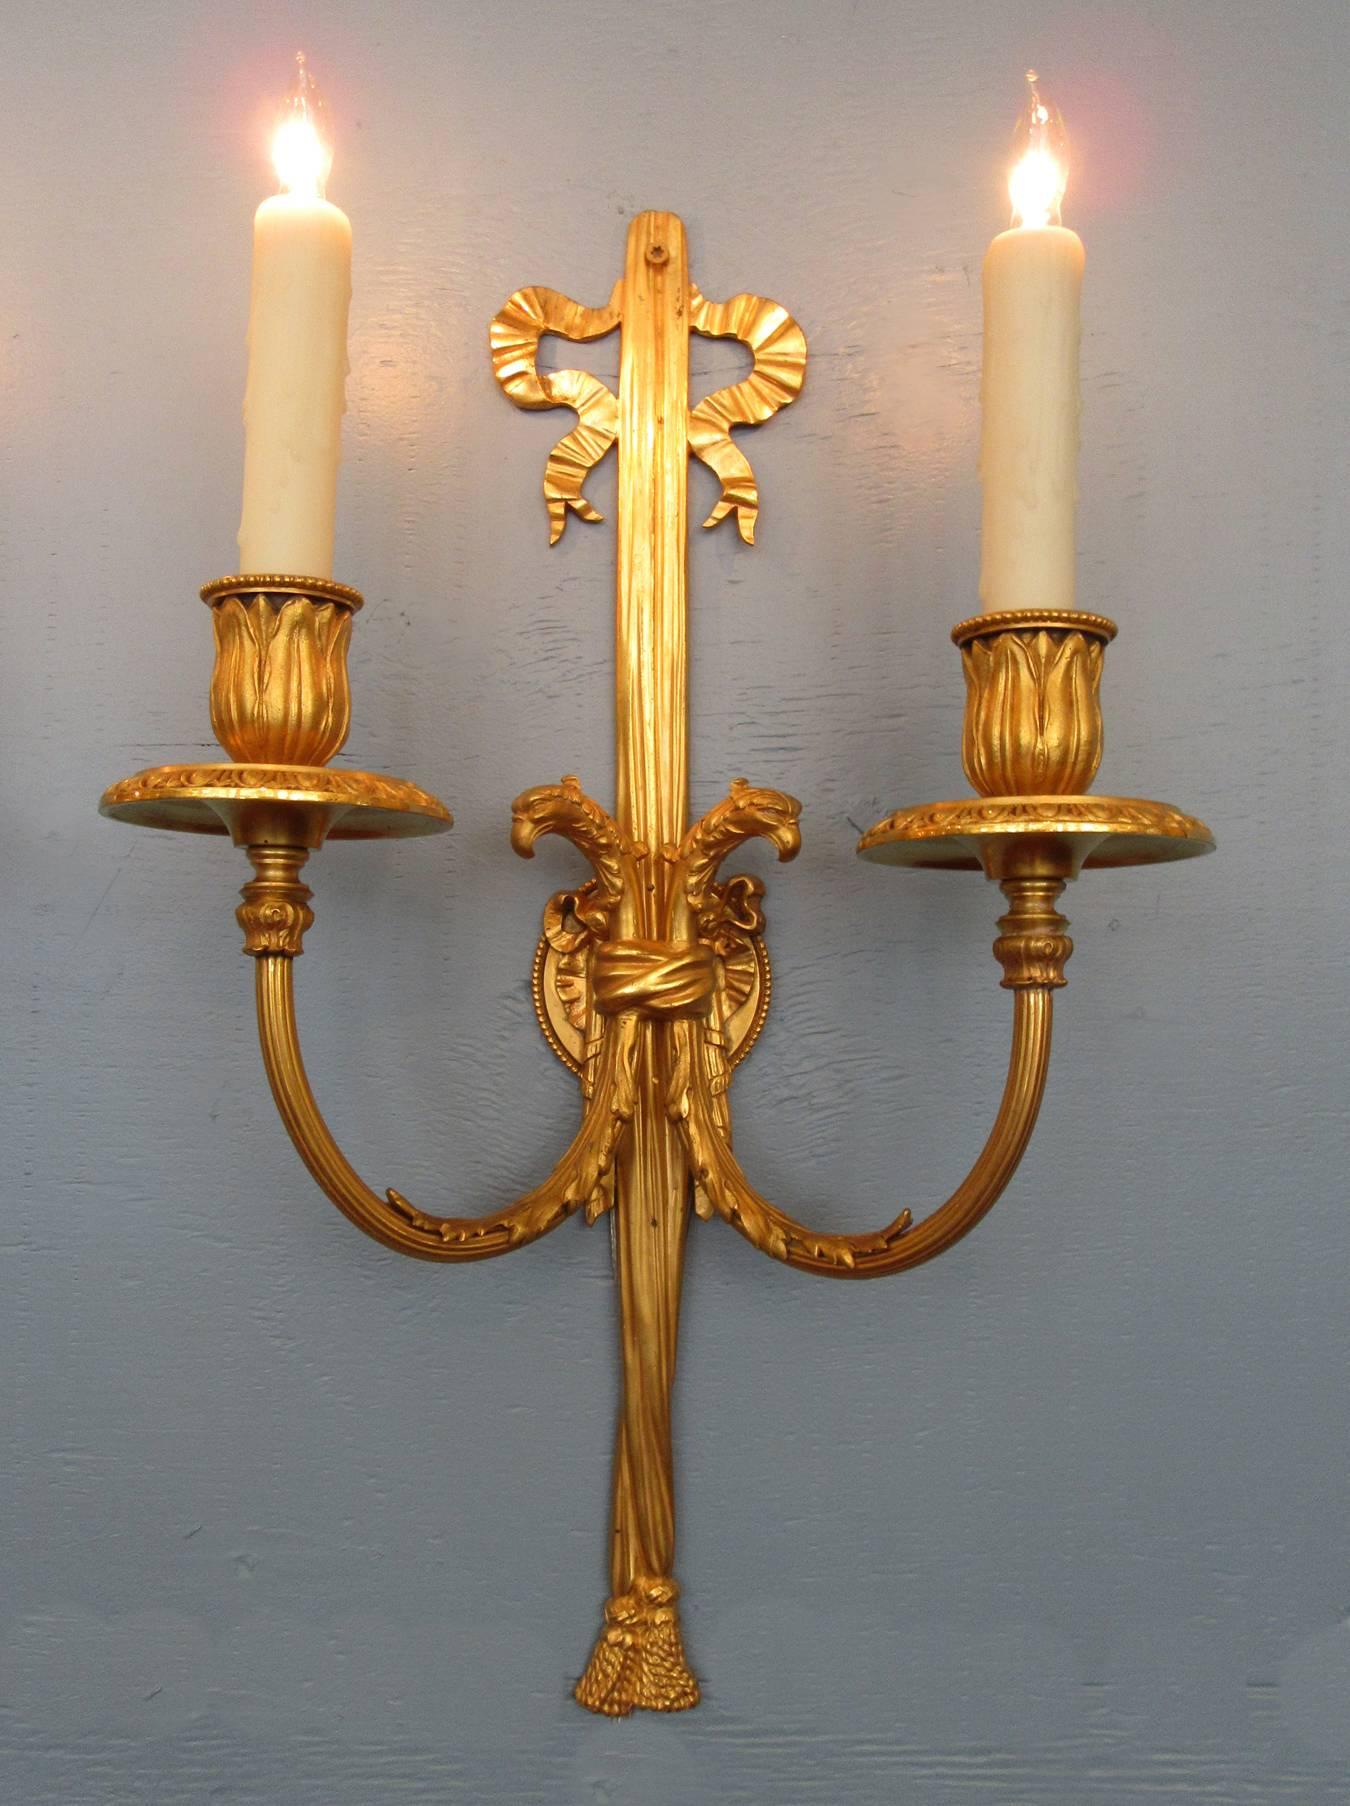 Gilt Early 20th Century, New York Regence Style Bronze Dore Sconces by Caldwell & Co